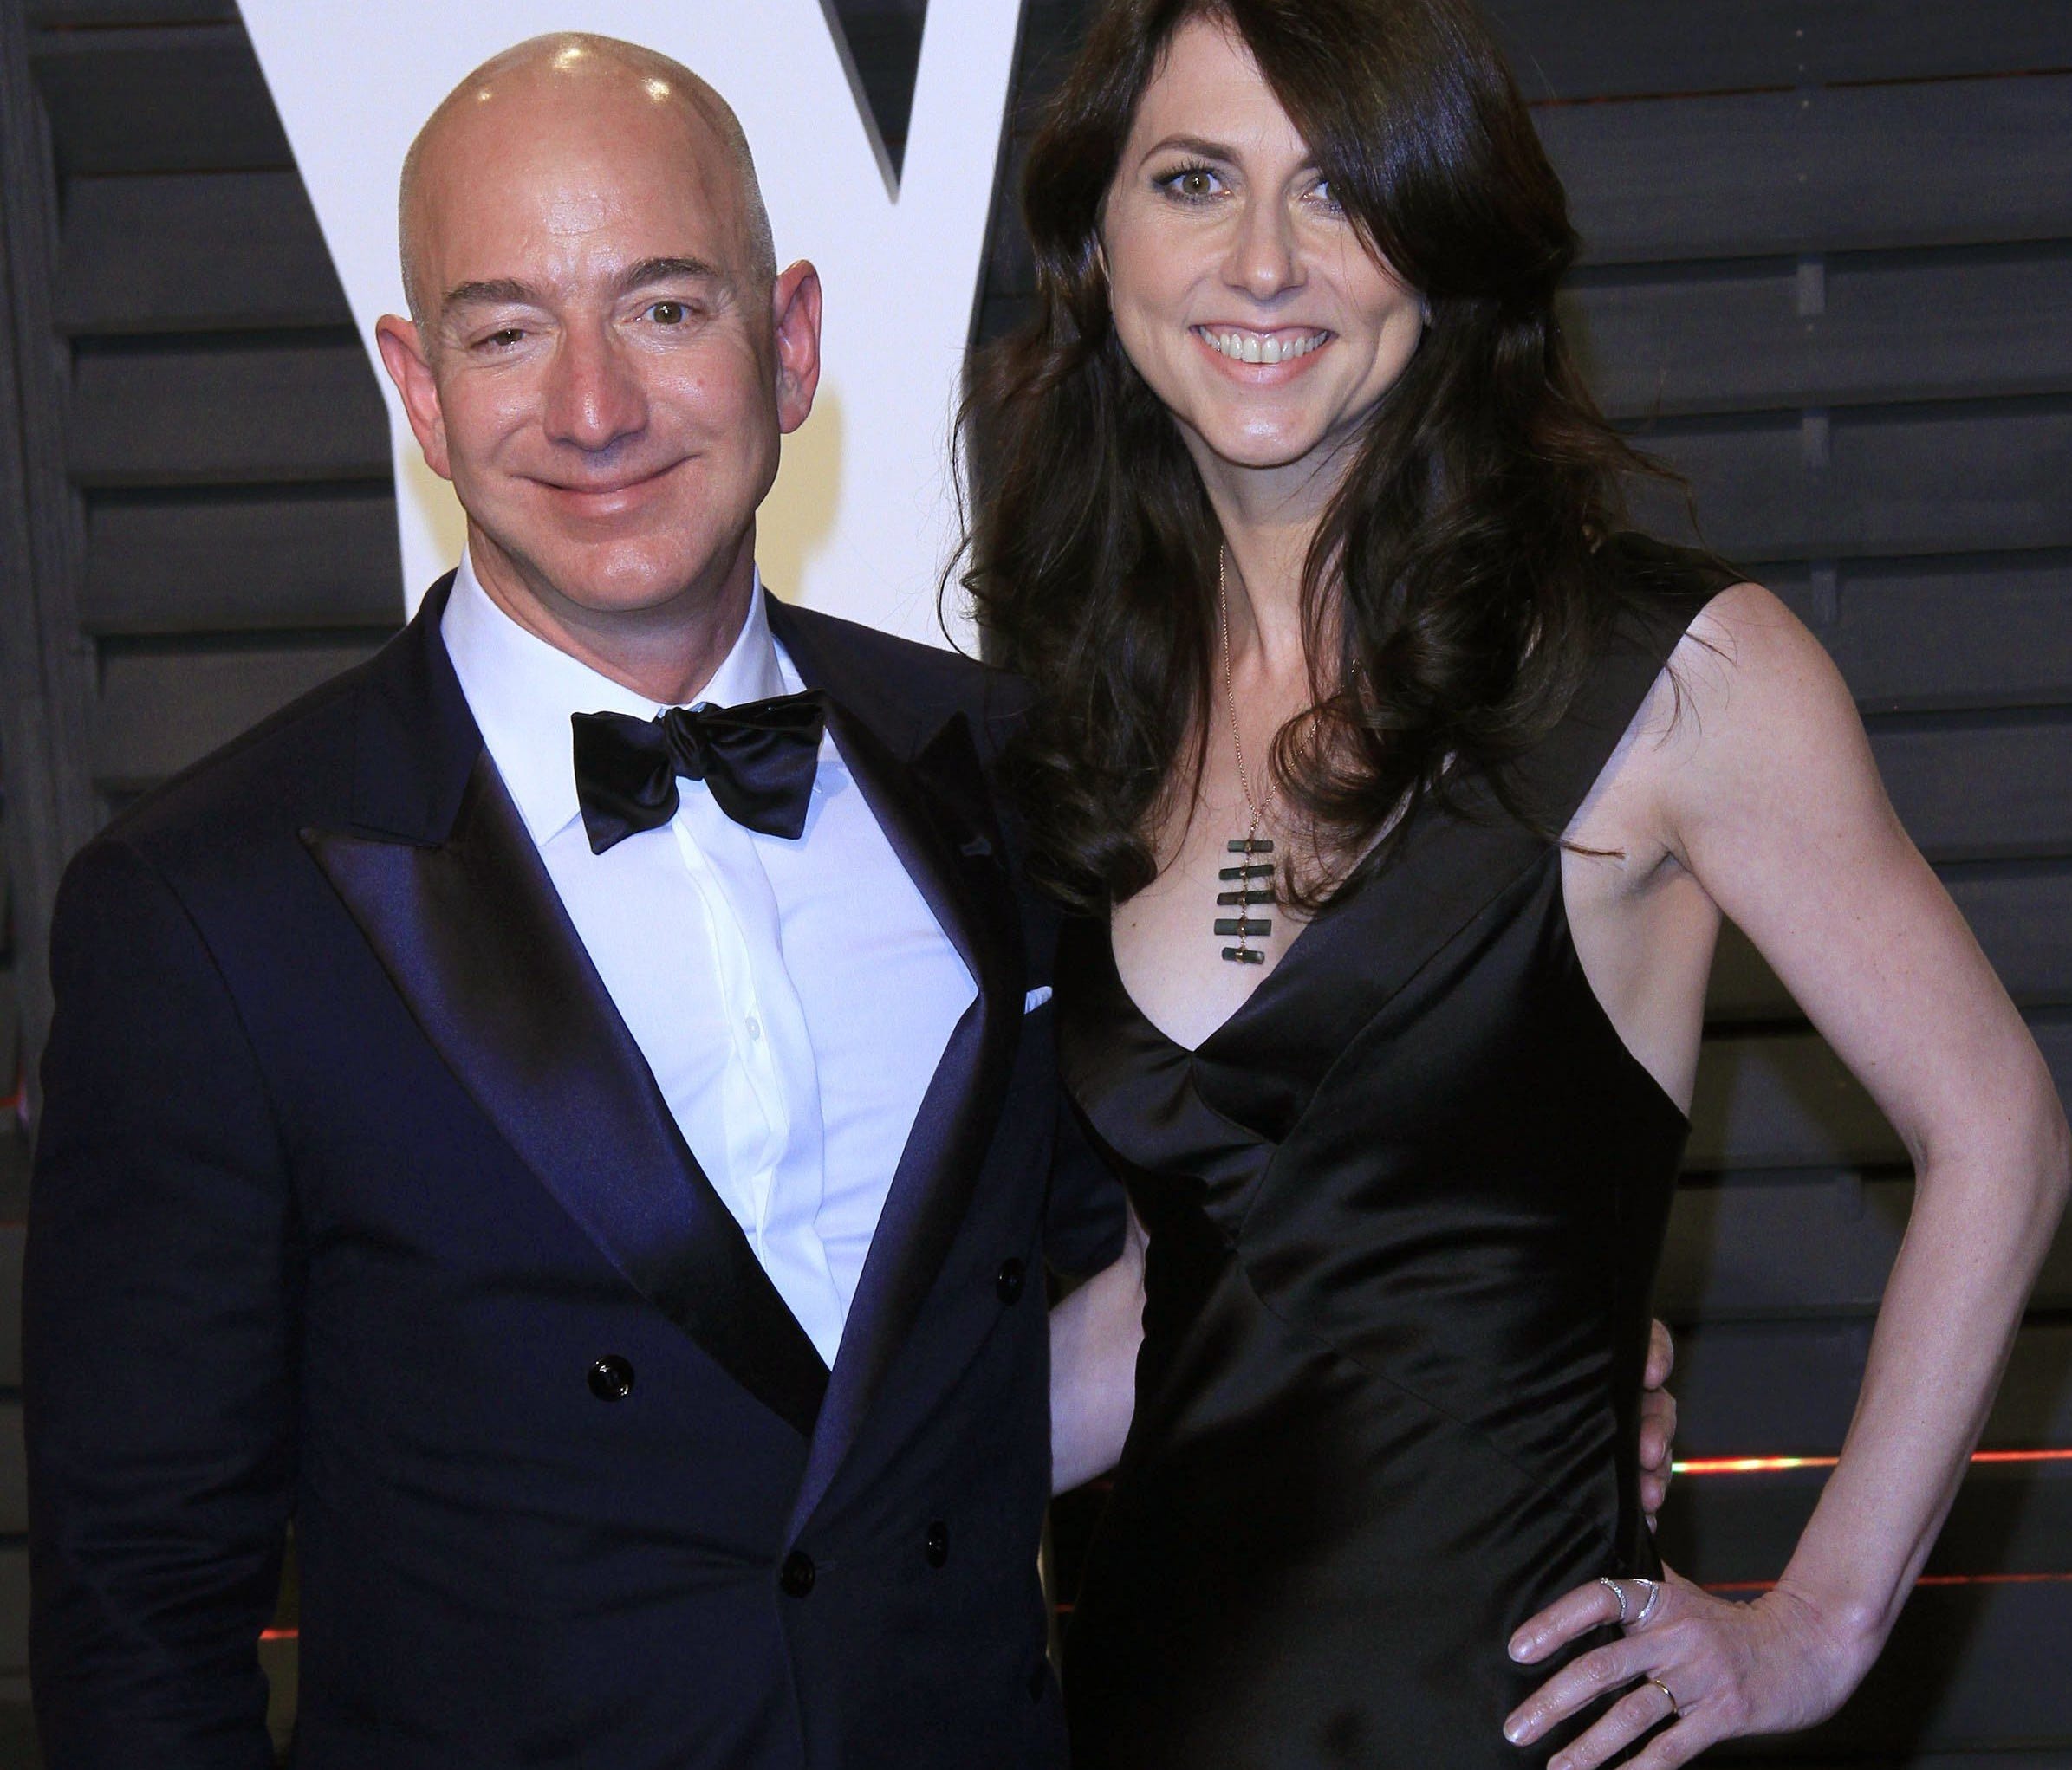 Amazon founder Jeff Bezos and wife MacKenzie Bezos arriving for the 2017 Vanity Fair Oscar Party following the 89th annual Academy Awards ceremony in Beverly Hills, Calif., Feb. 26, 2017.